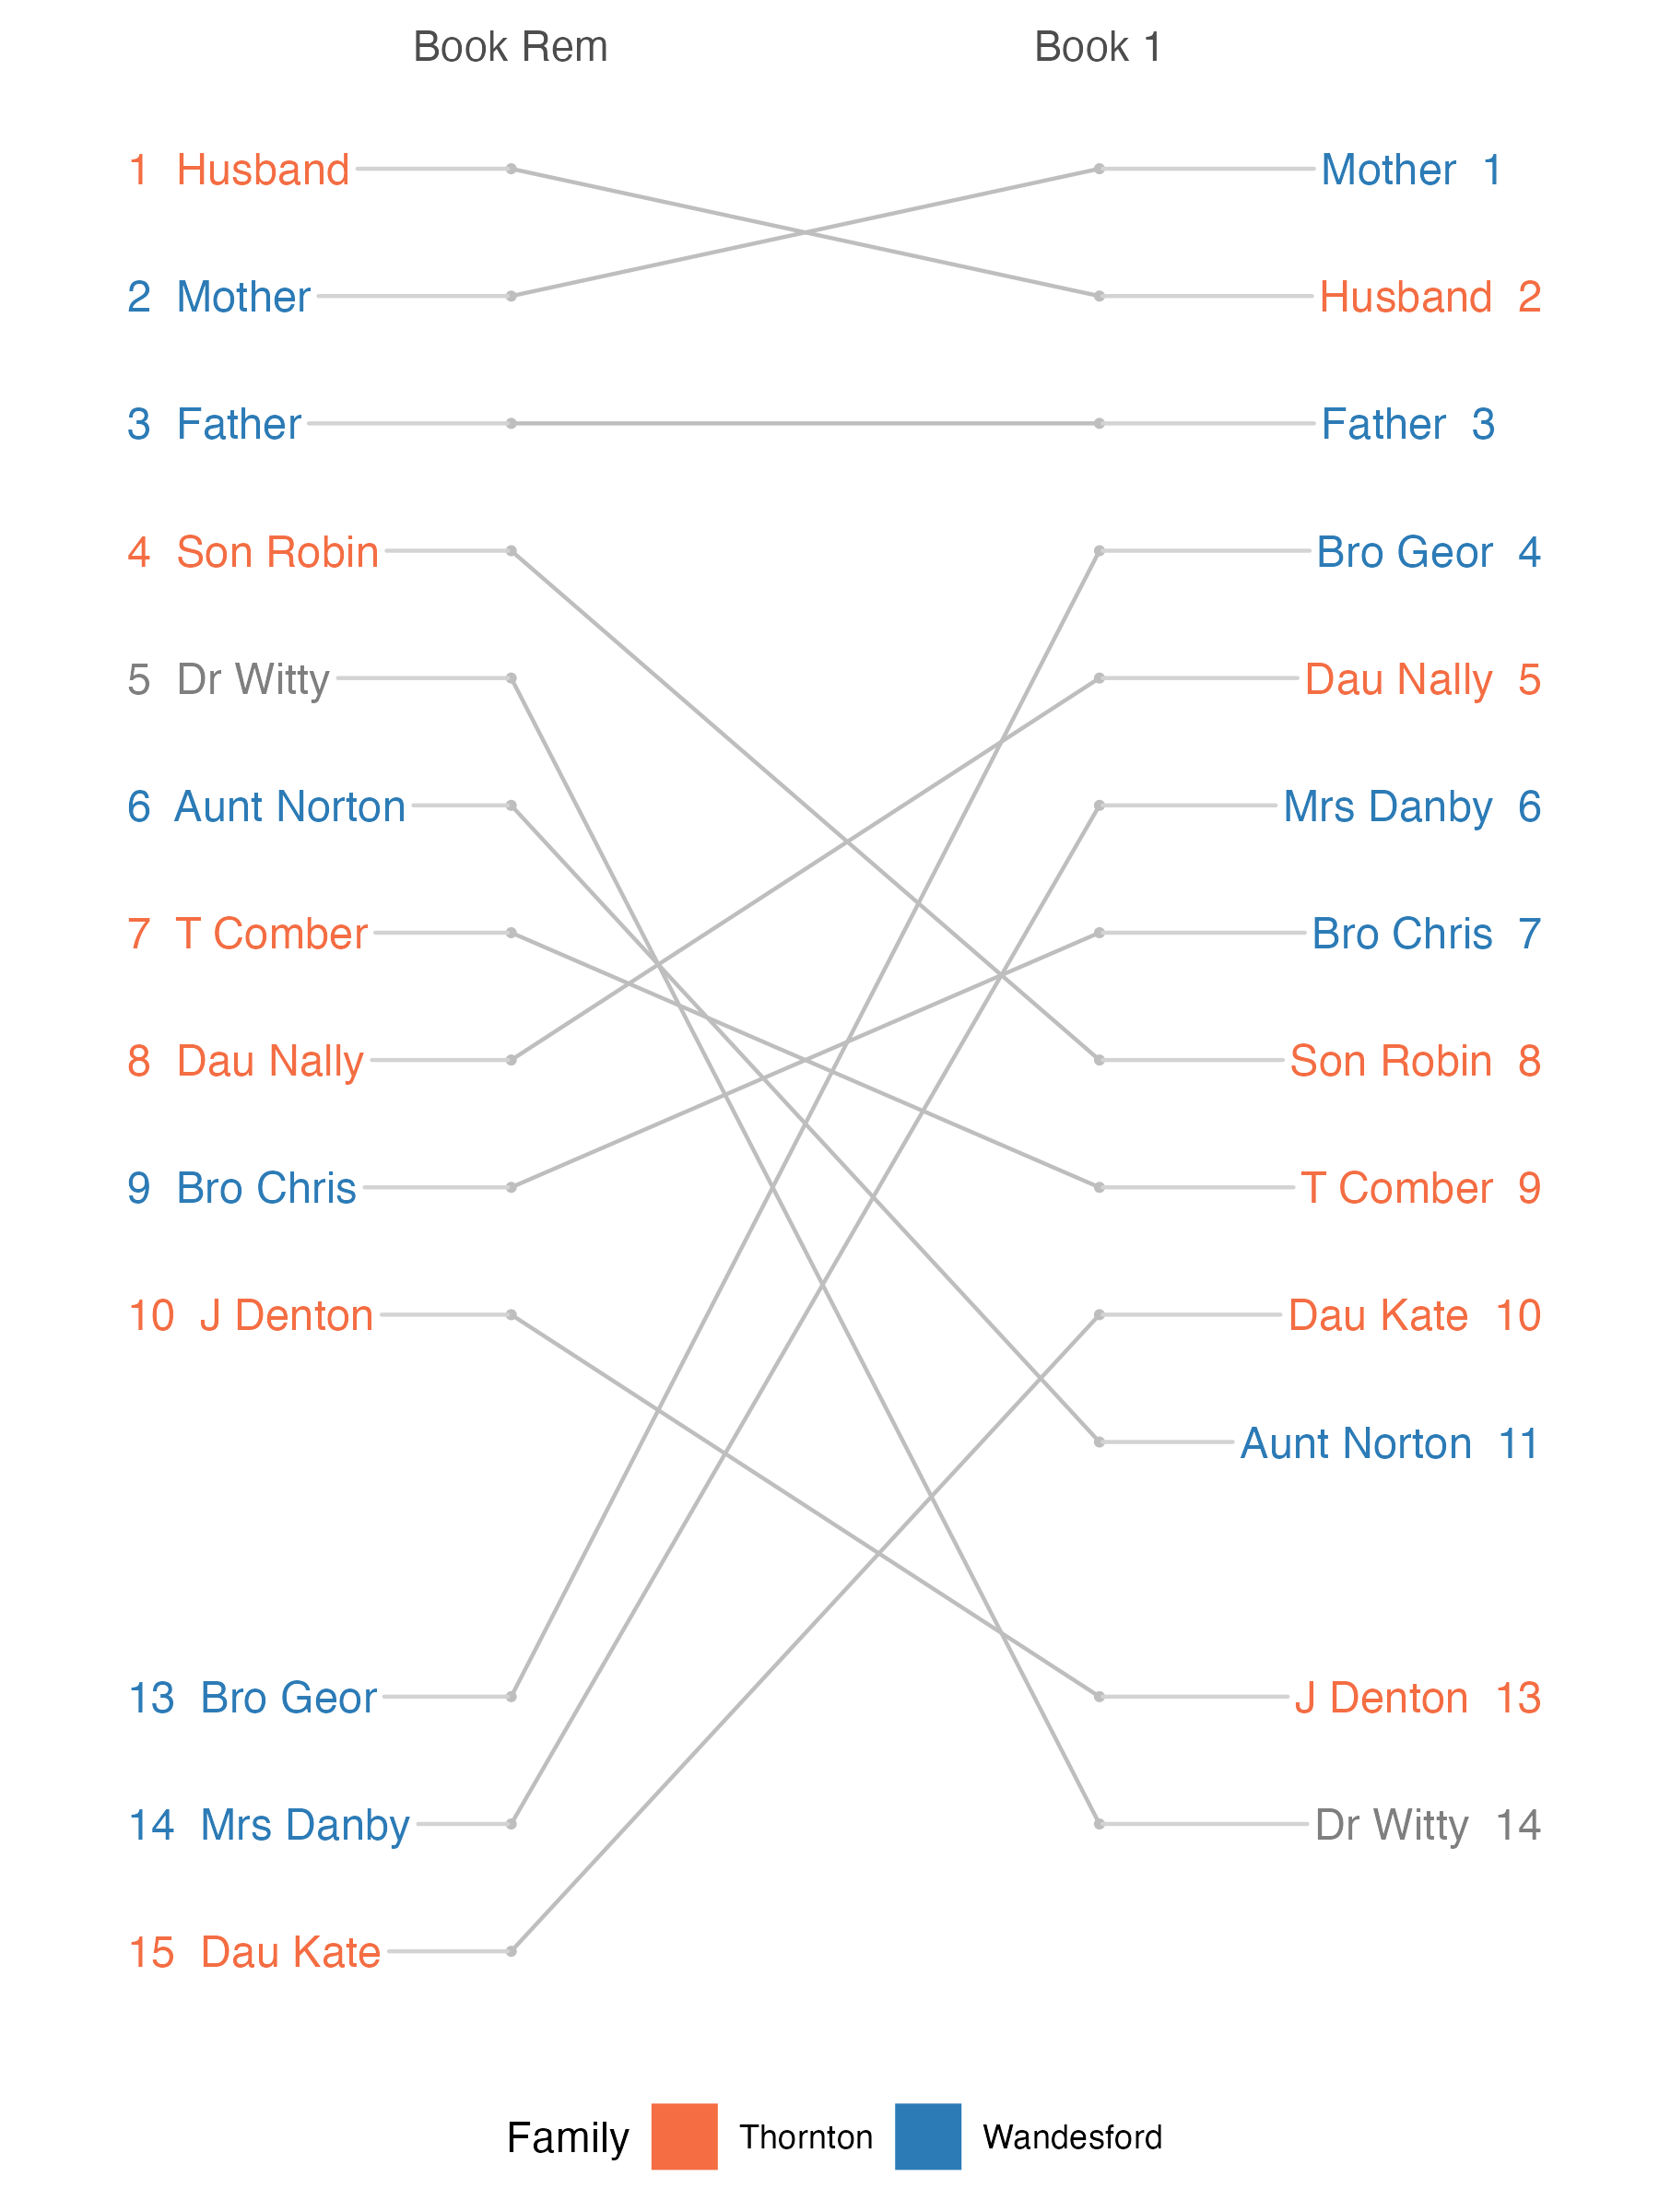 A 'slopegraph' which shows the ten most frequently mentioned
people in two of Alice's books and highlights the changes in
their rankings.